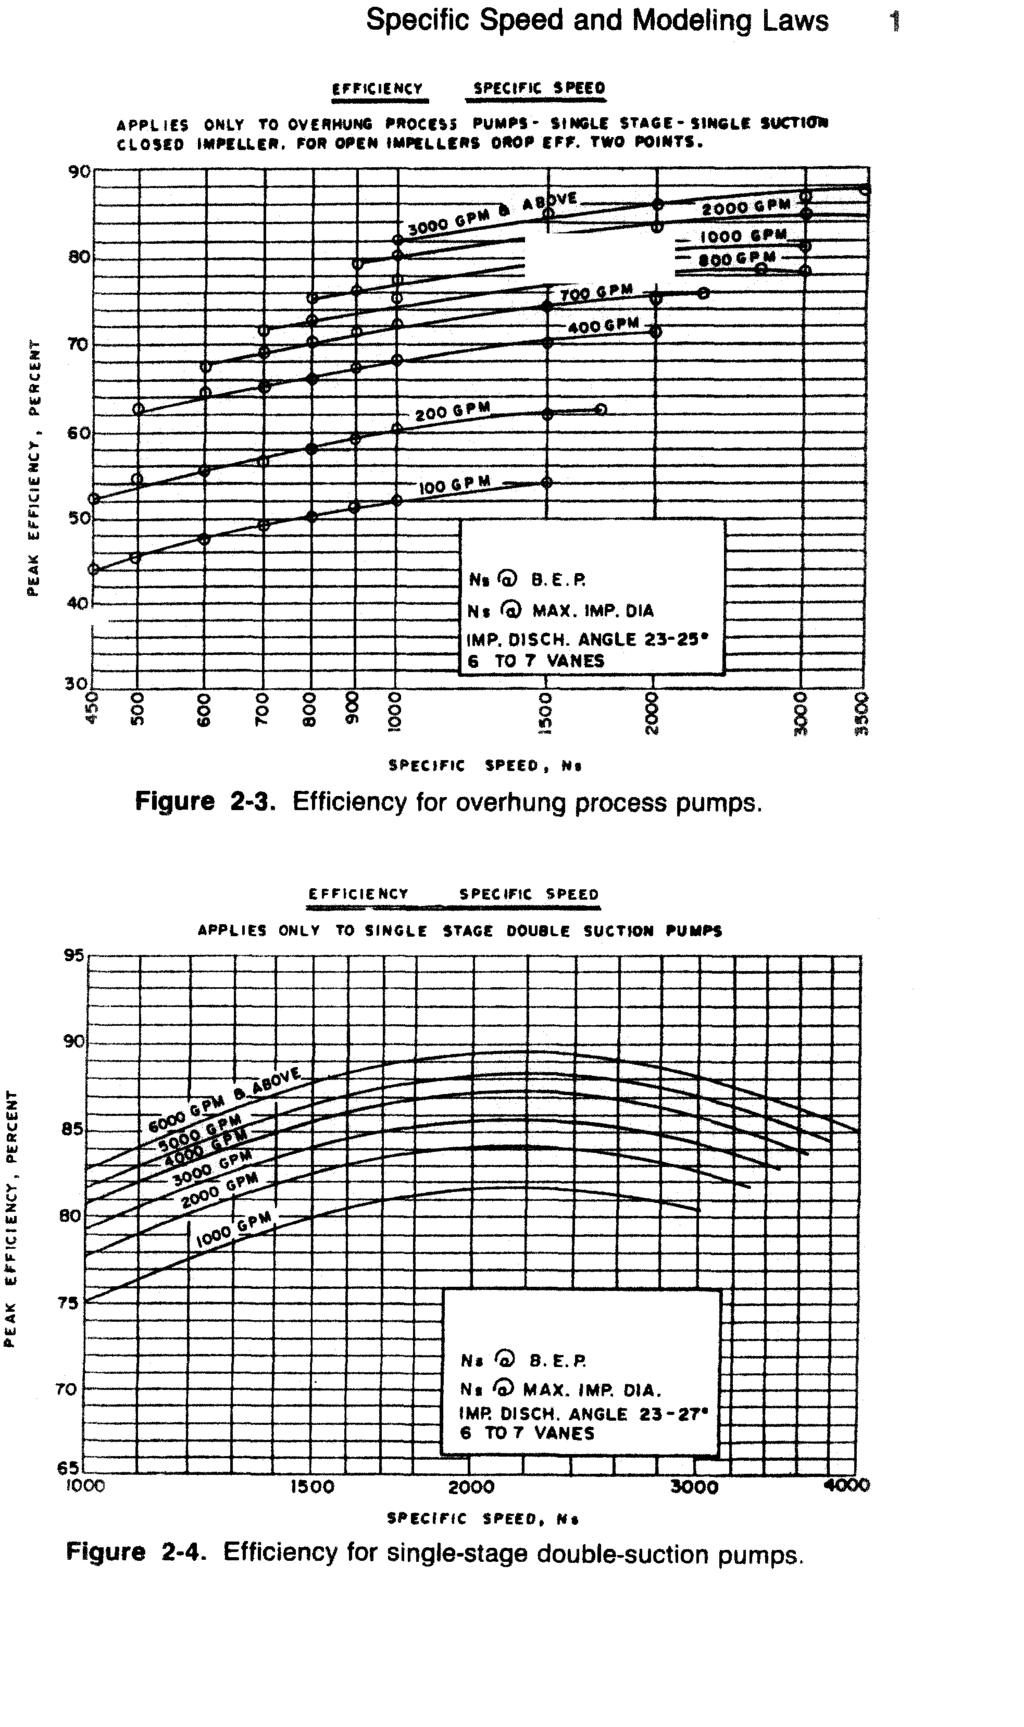 Specific Speed and Modeling Laws 17 Figure 2-3.